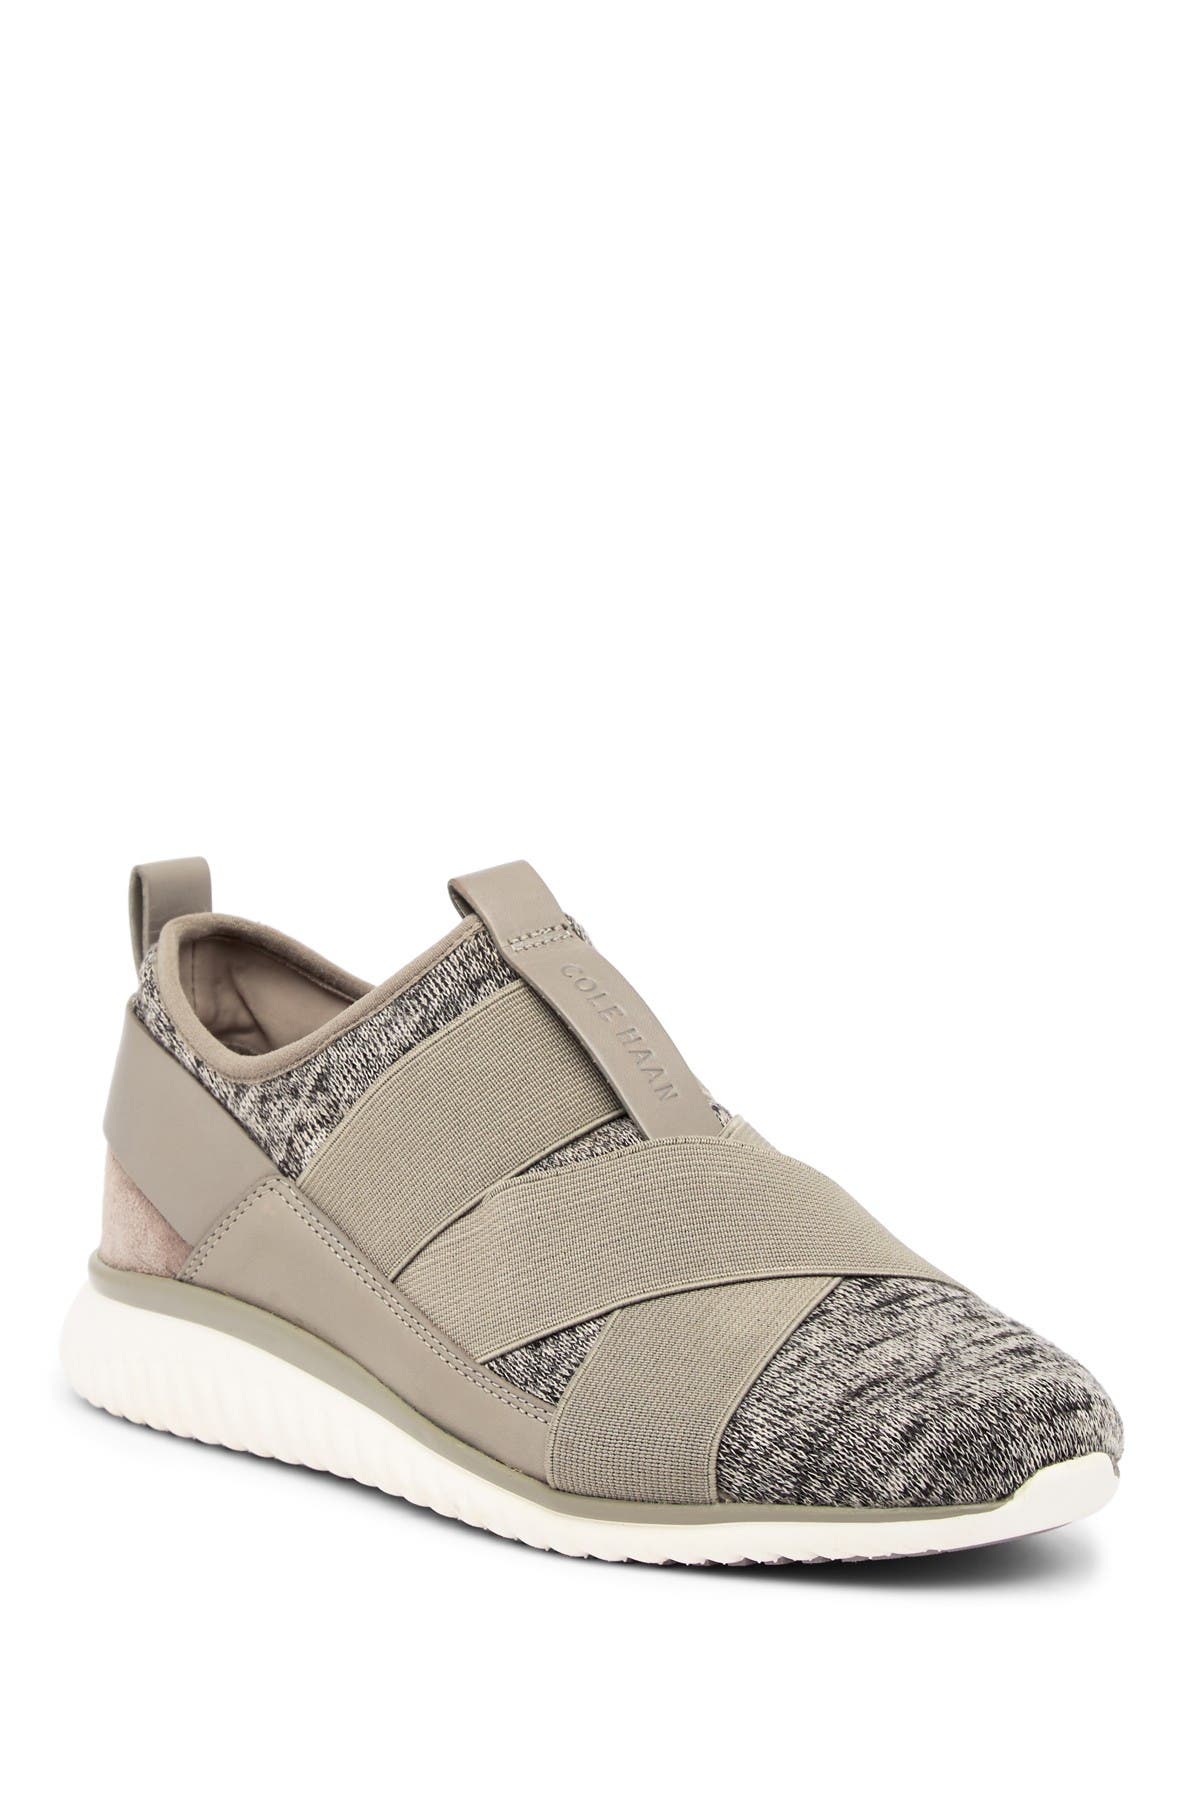 Cole Haan | StudioGrand Knit Trainer 